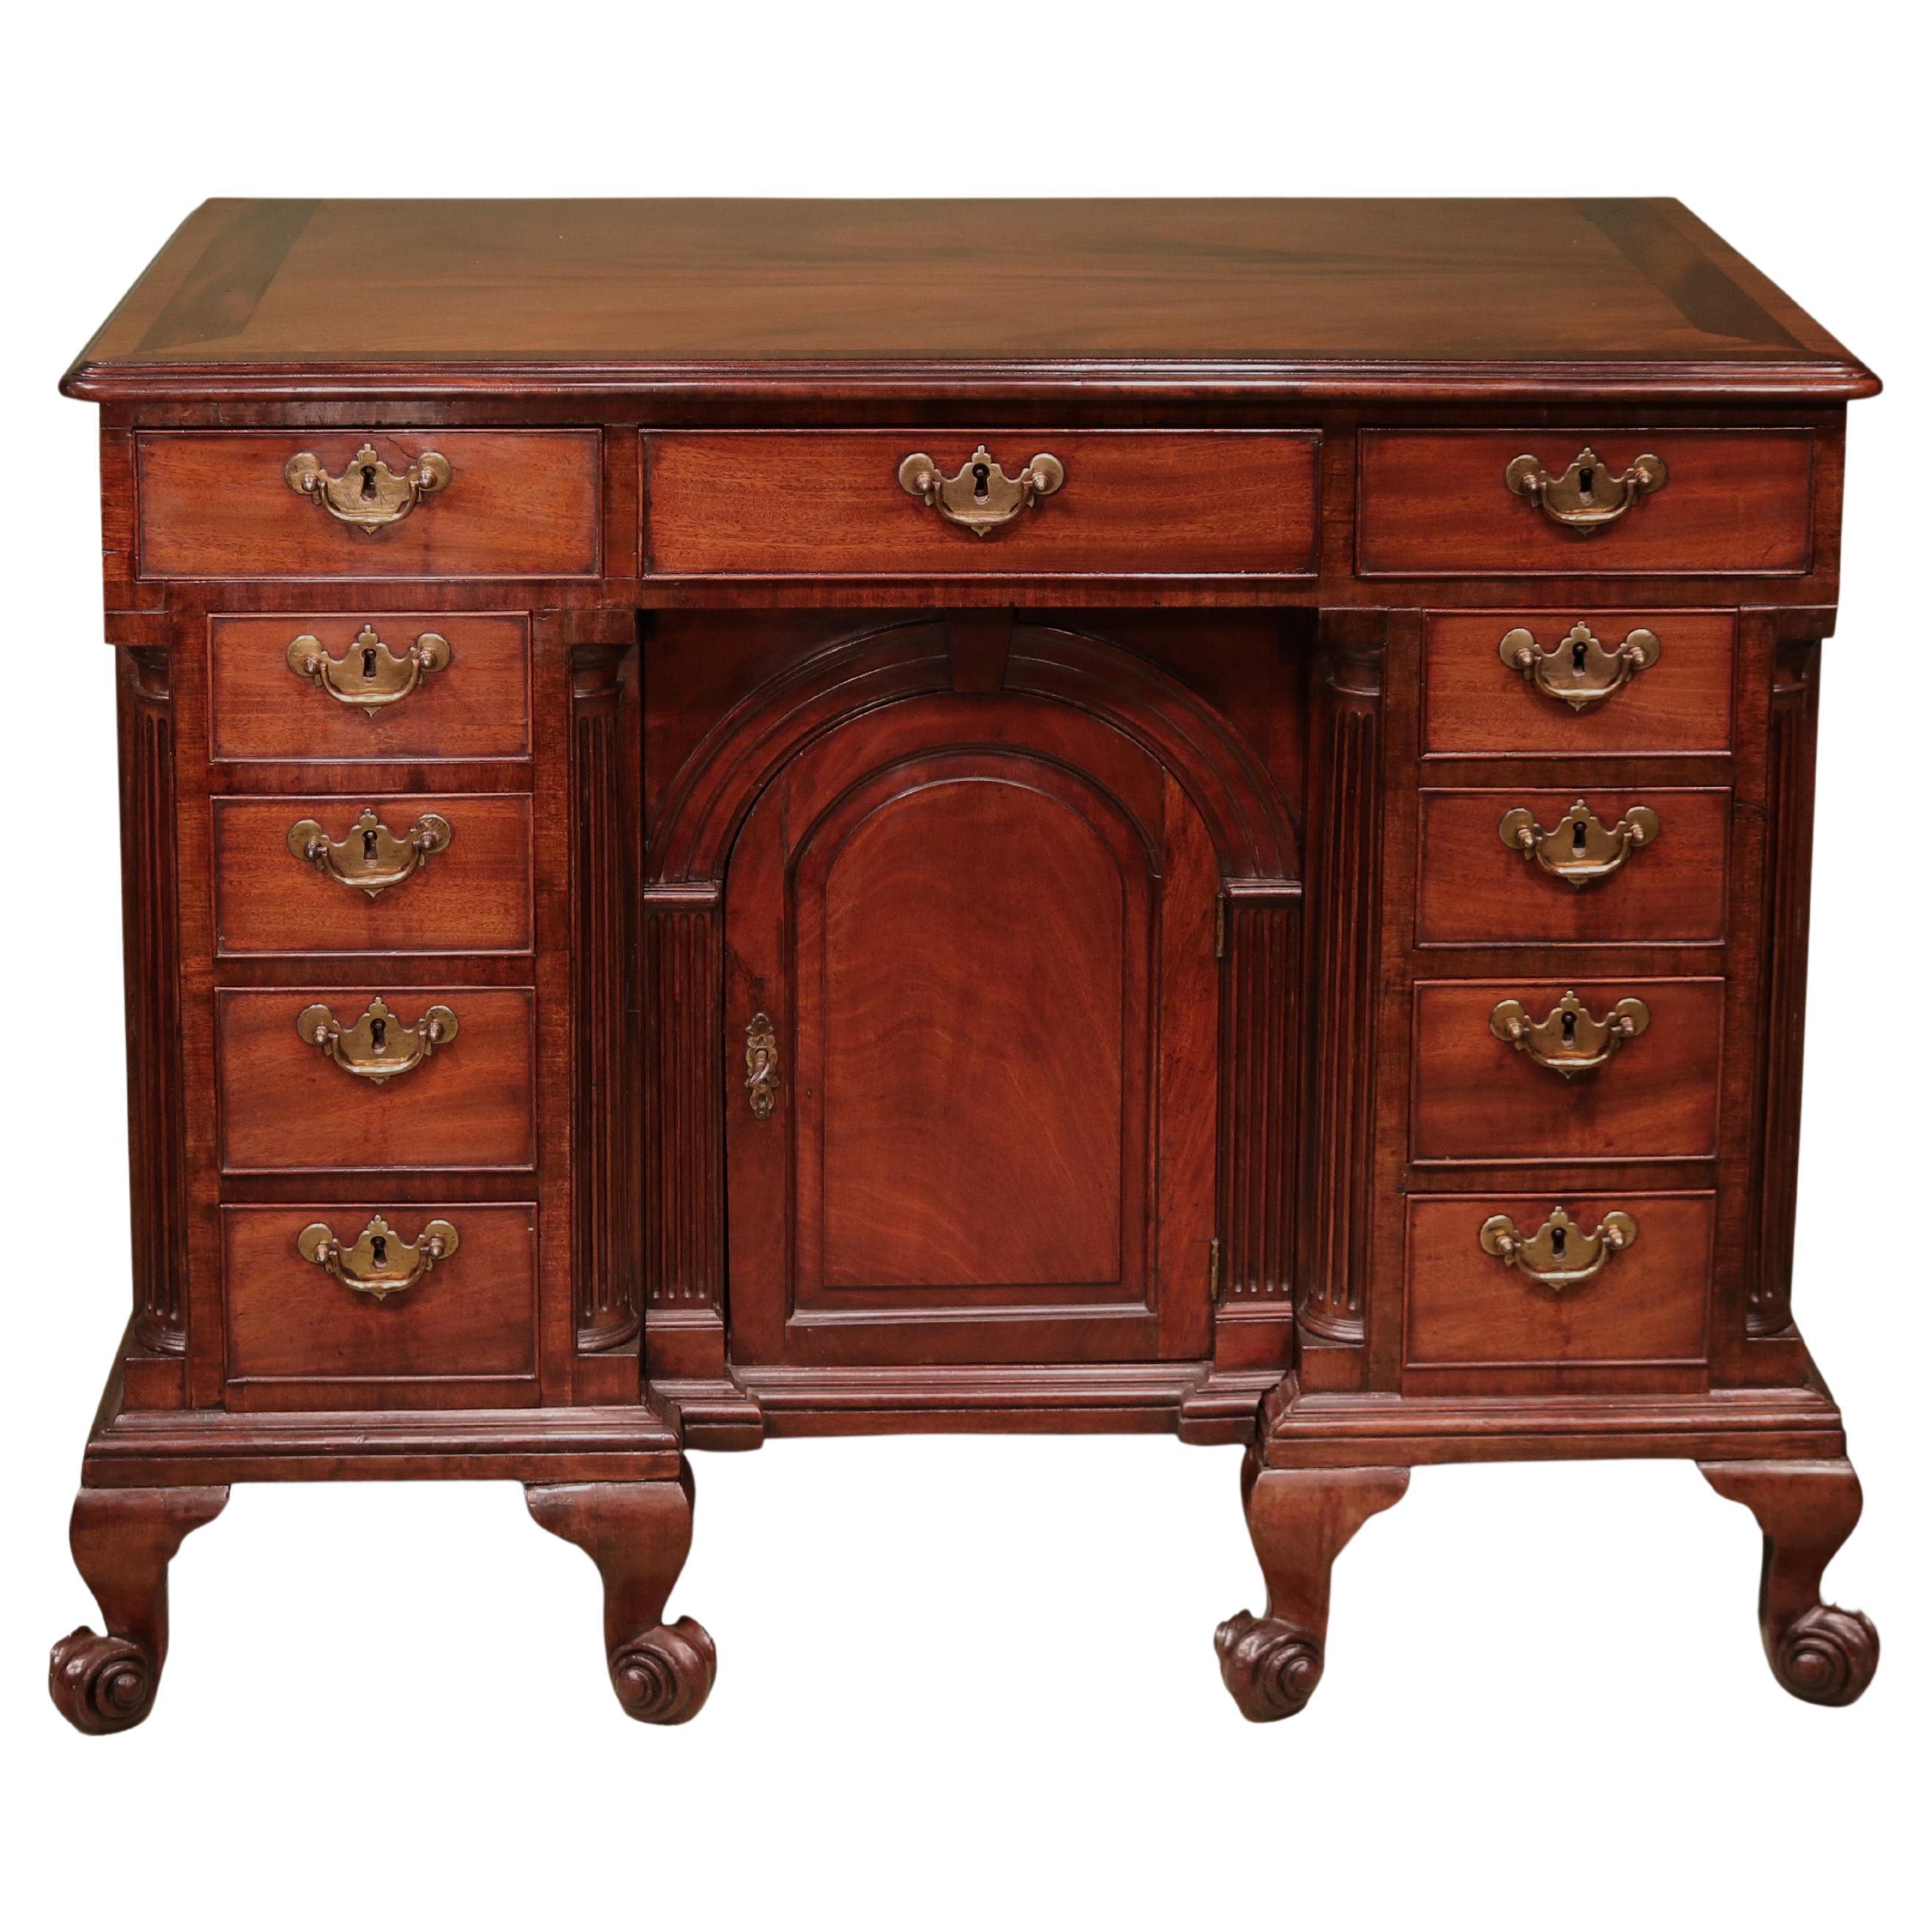 Antique George II period mahogany kneehole desk For Sale